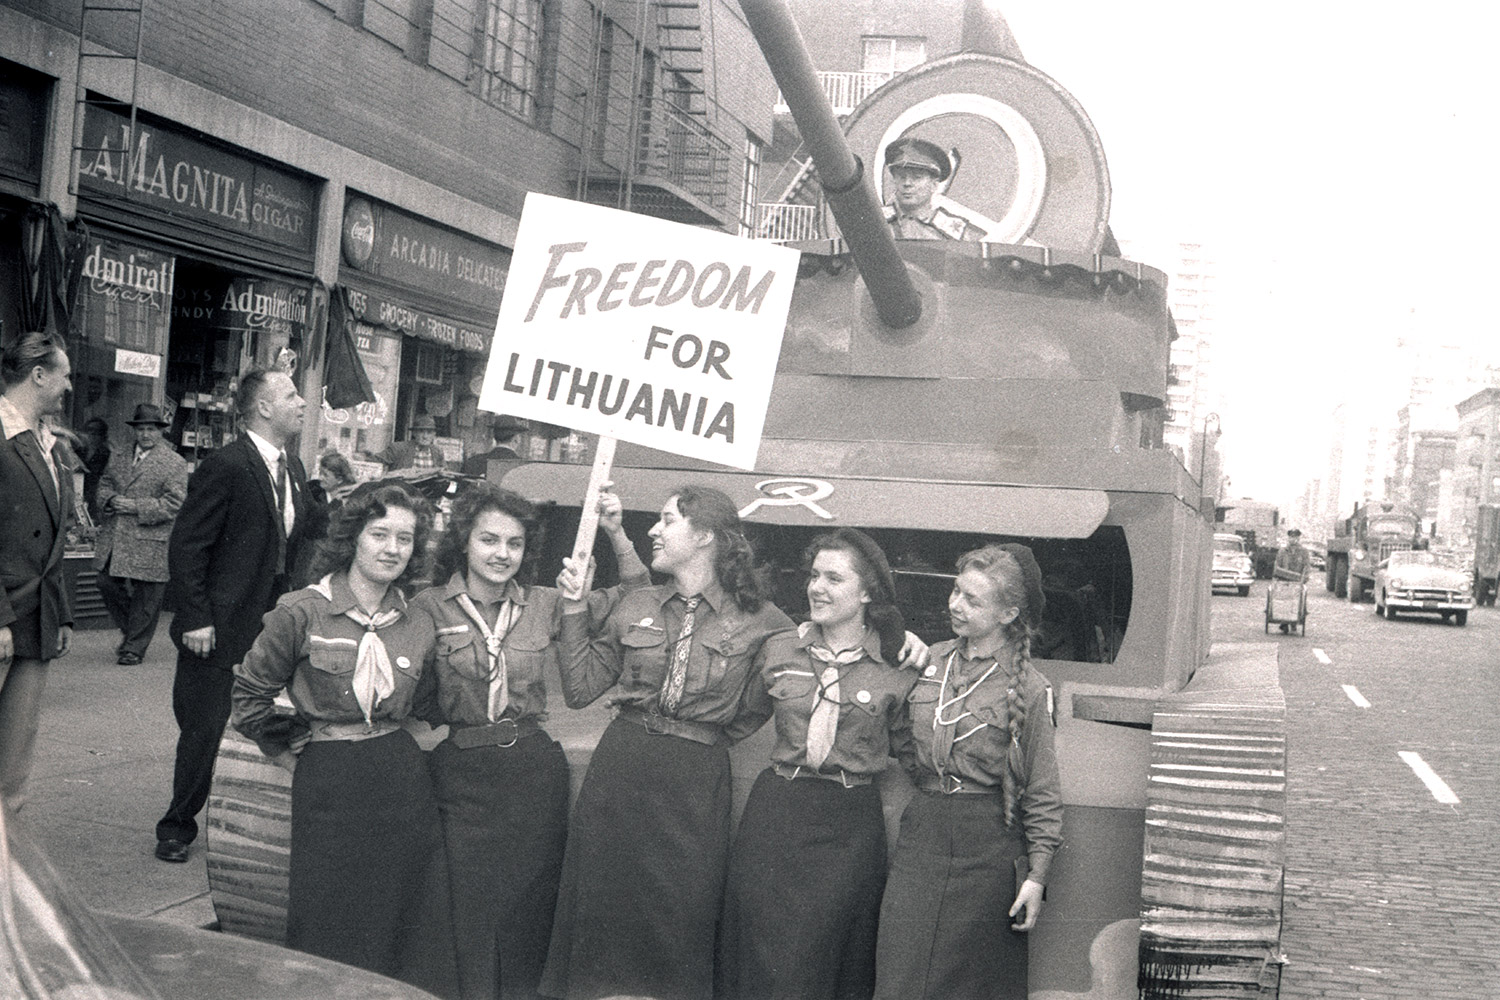 1957 – New York, USA. Members of the Lithuanian American community and Lithuanian youth organisations at the Loyalty Day parade protest against Lithuania’s occupation and annexation by the Soviets. Soviet tank built by Scouts and the LSS. LVCA, photographer: G. Penikas.